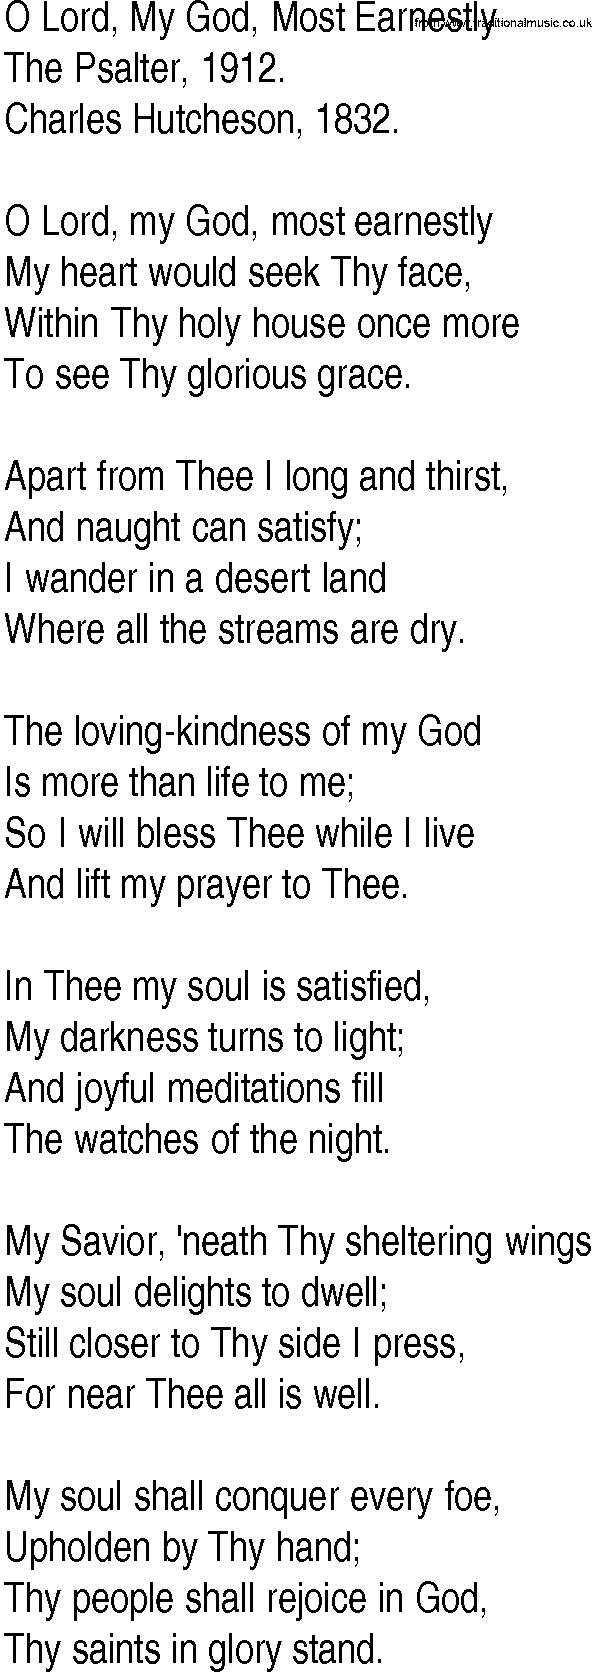 Hymn and Gospel Song: O Lord, My God, Most Earnestly by The Psalter lyrics